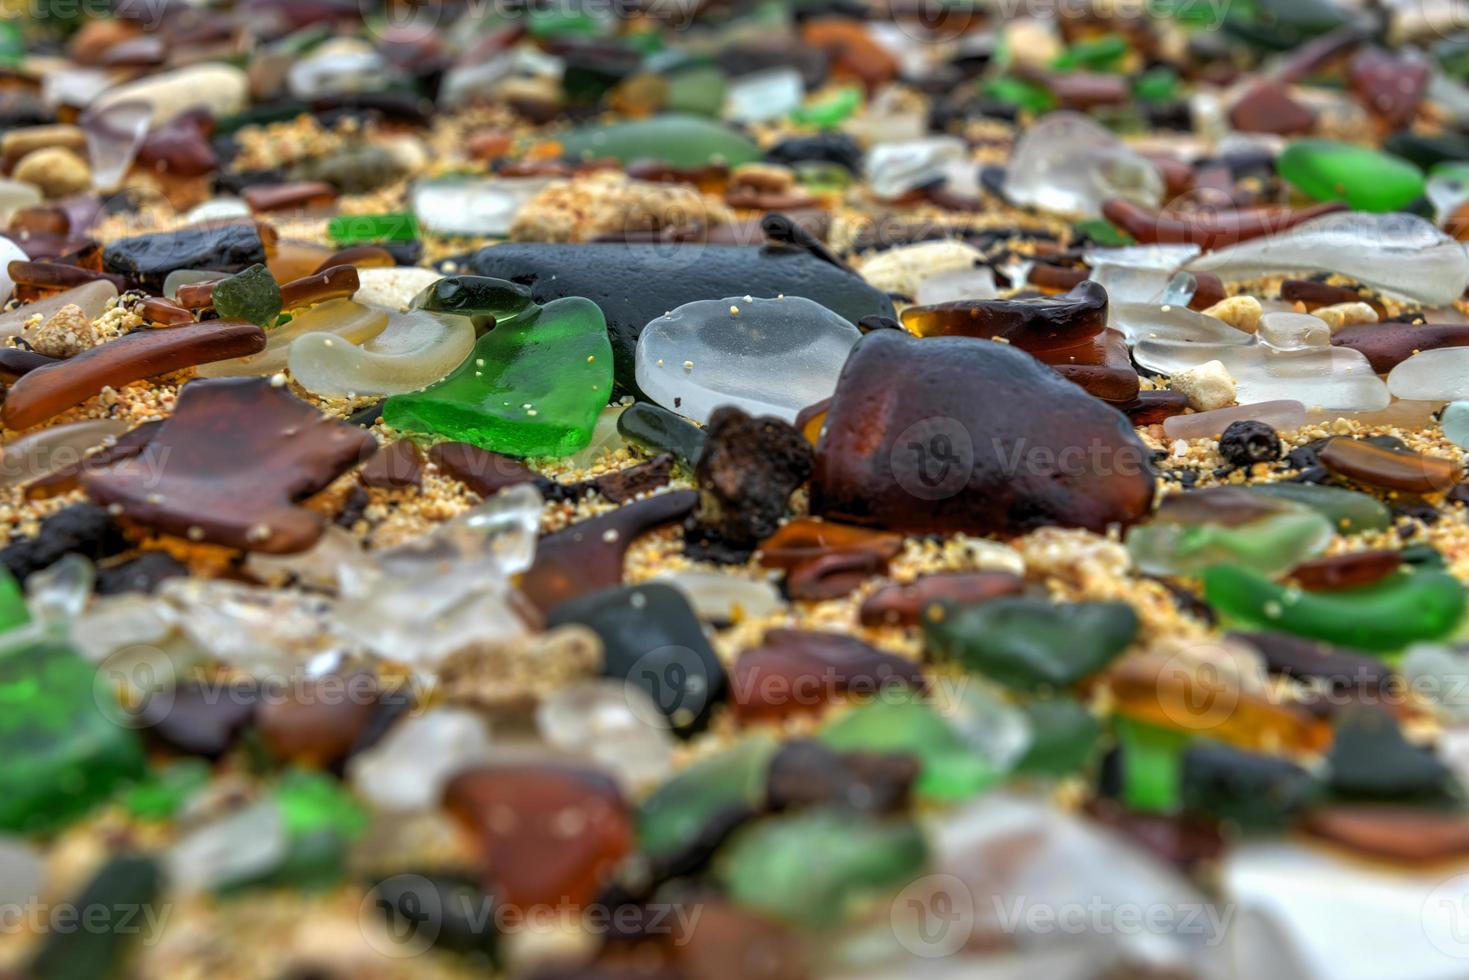 Seaglass Beach in Bermuda consisting of worn recycled glass bottles. photo